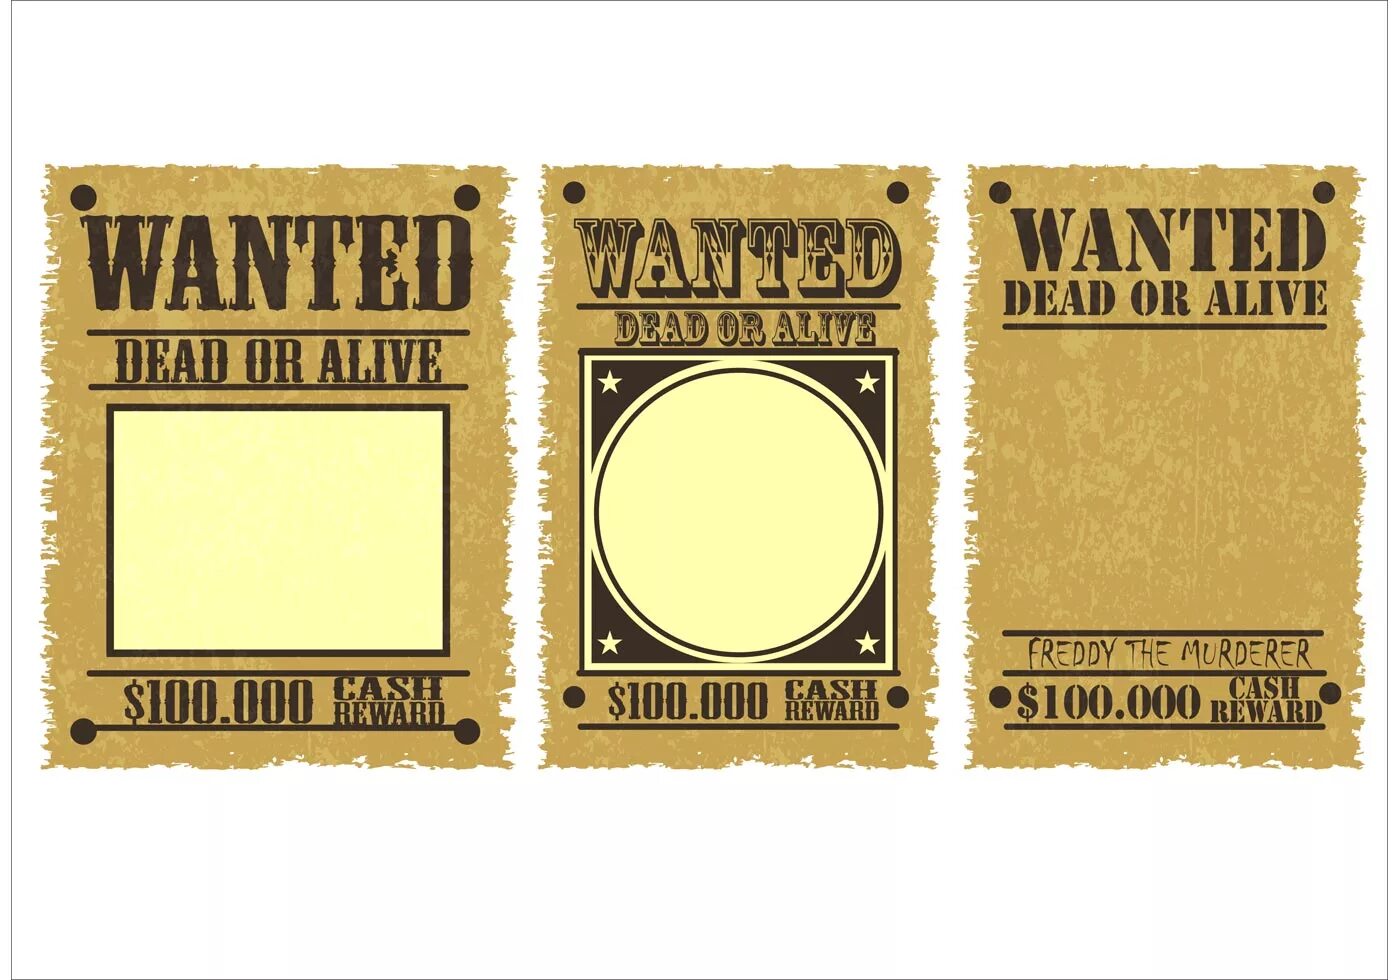 Wanted dangerous. Wanted плакат. Wanted вектор. Wanted Dead or Alive шаблон. Плакат wanted Dead or Alive.